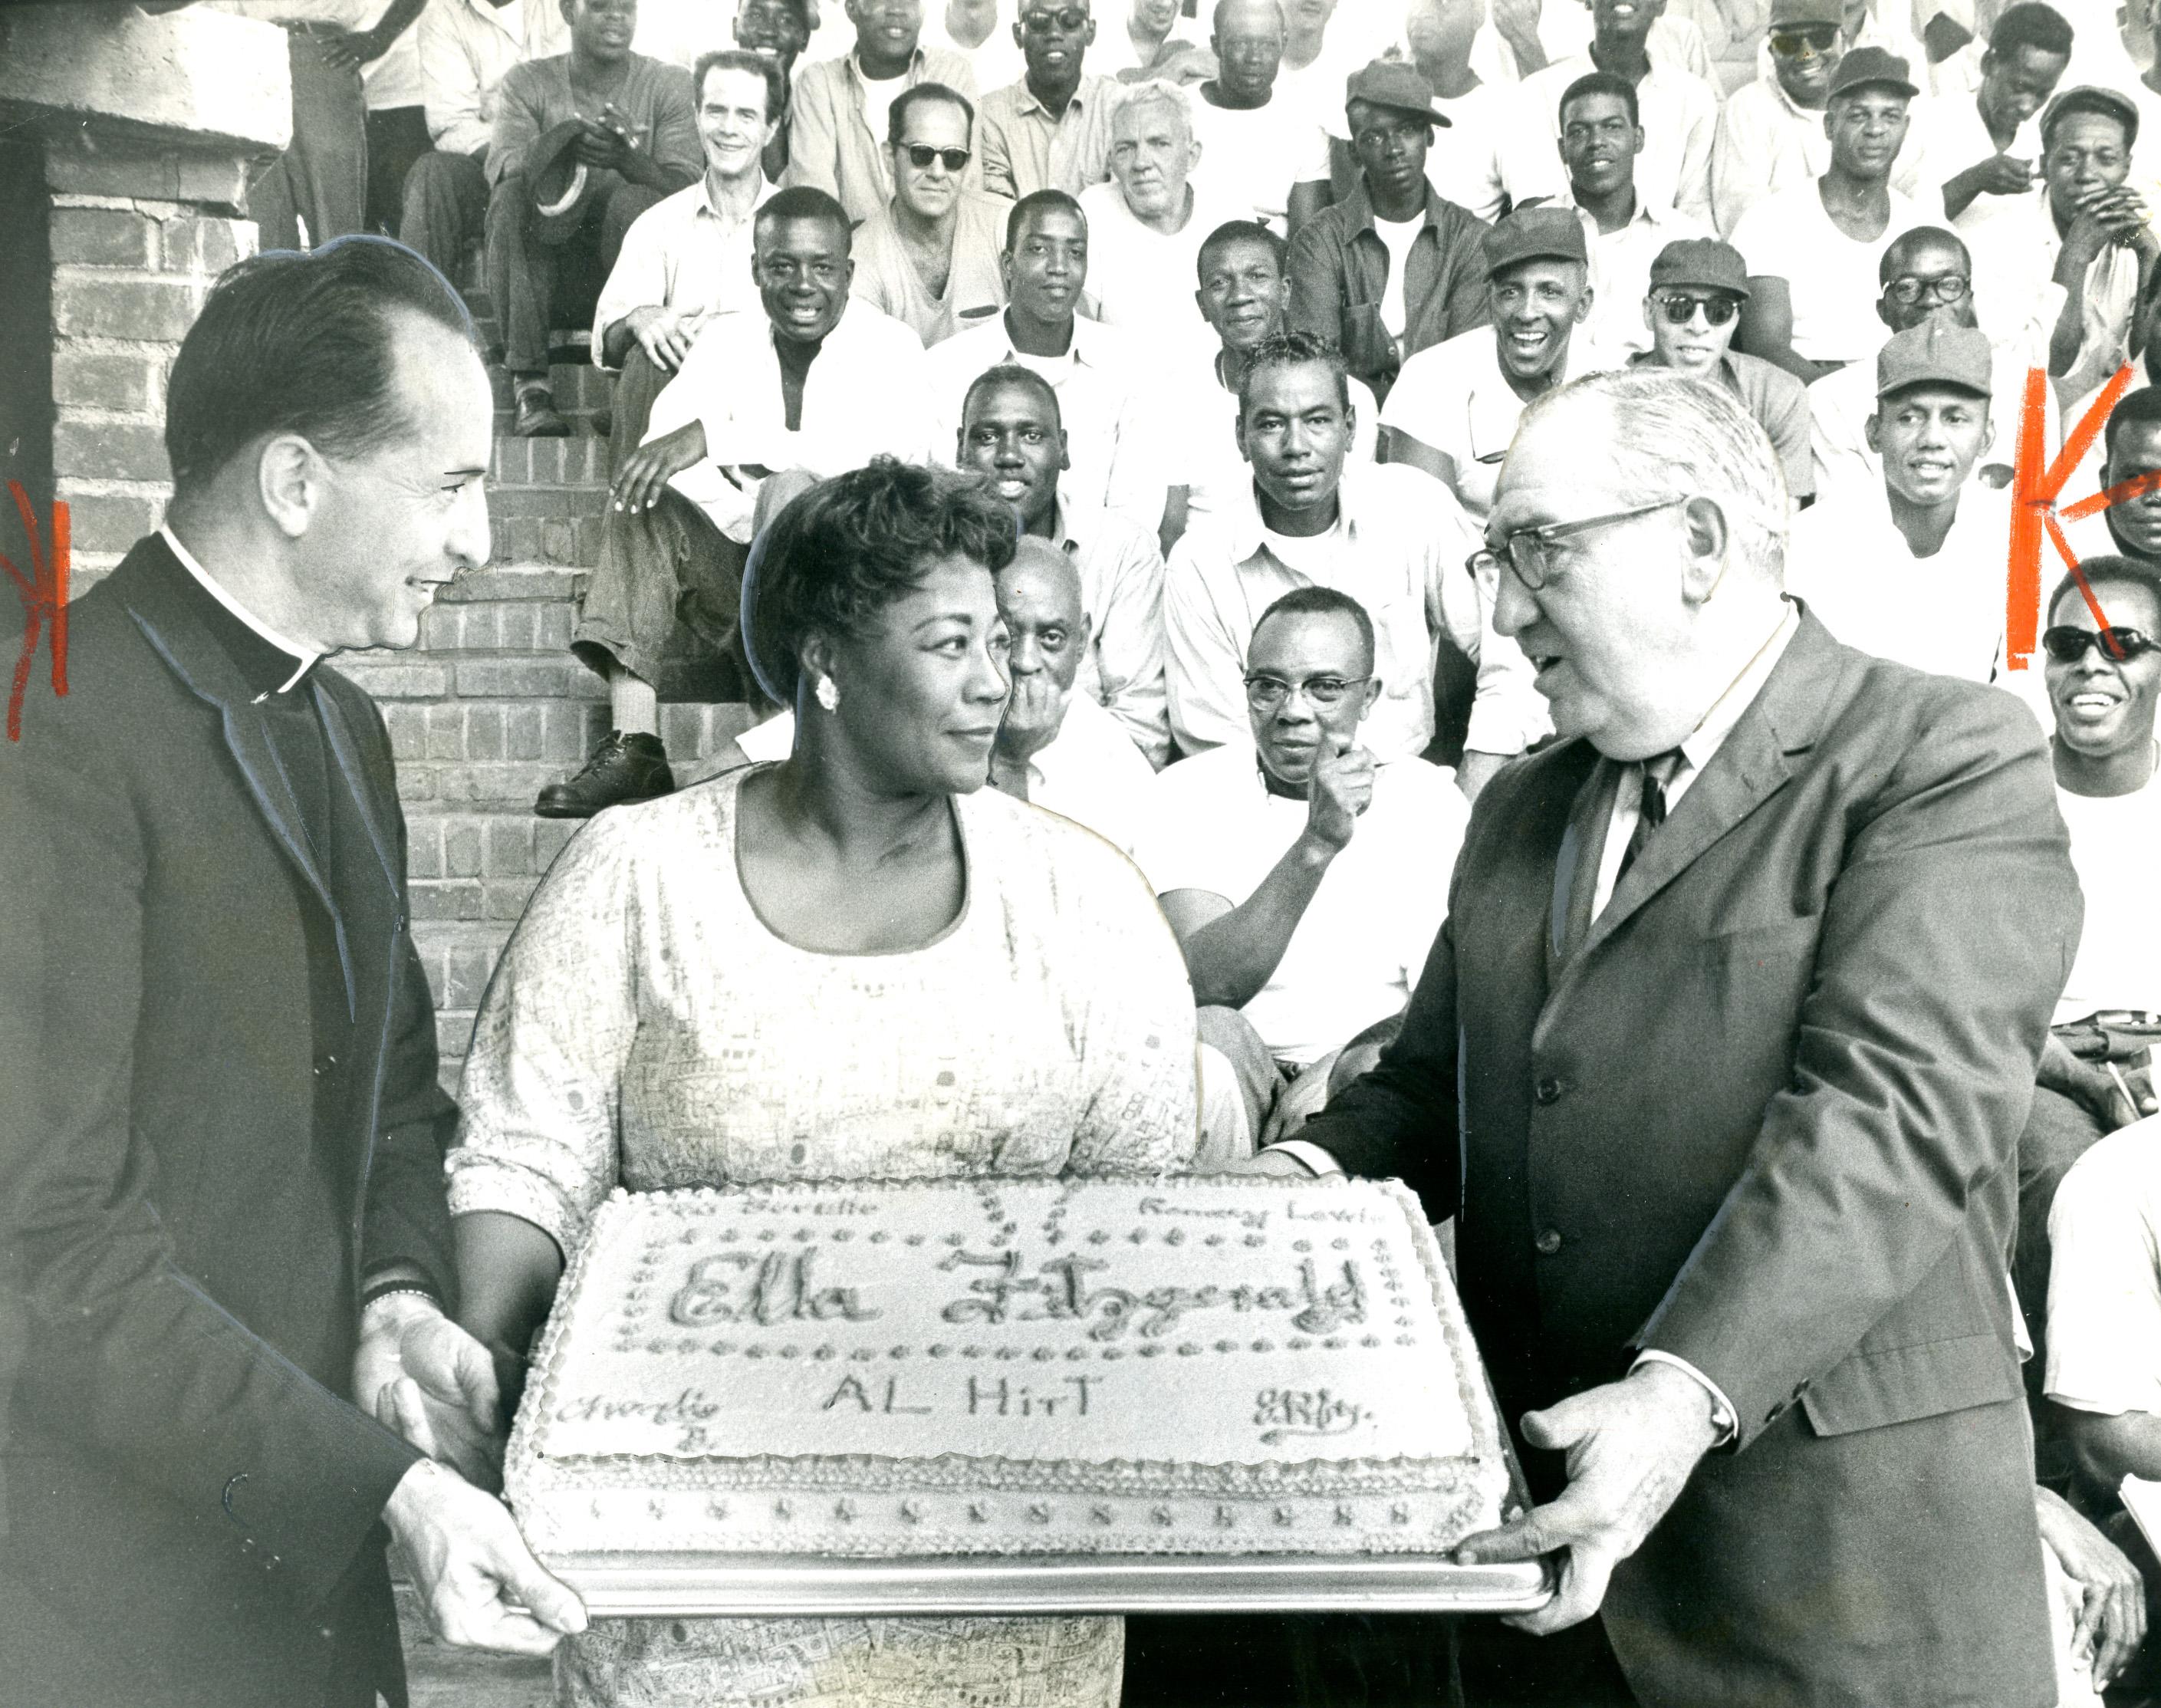 Ella Fitzgerald presented with cake at Lorton Jazz Festival. (Credit: Reprinted with permission of the DC Public Library, Star Collection, © Washington Post.)